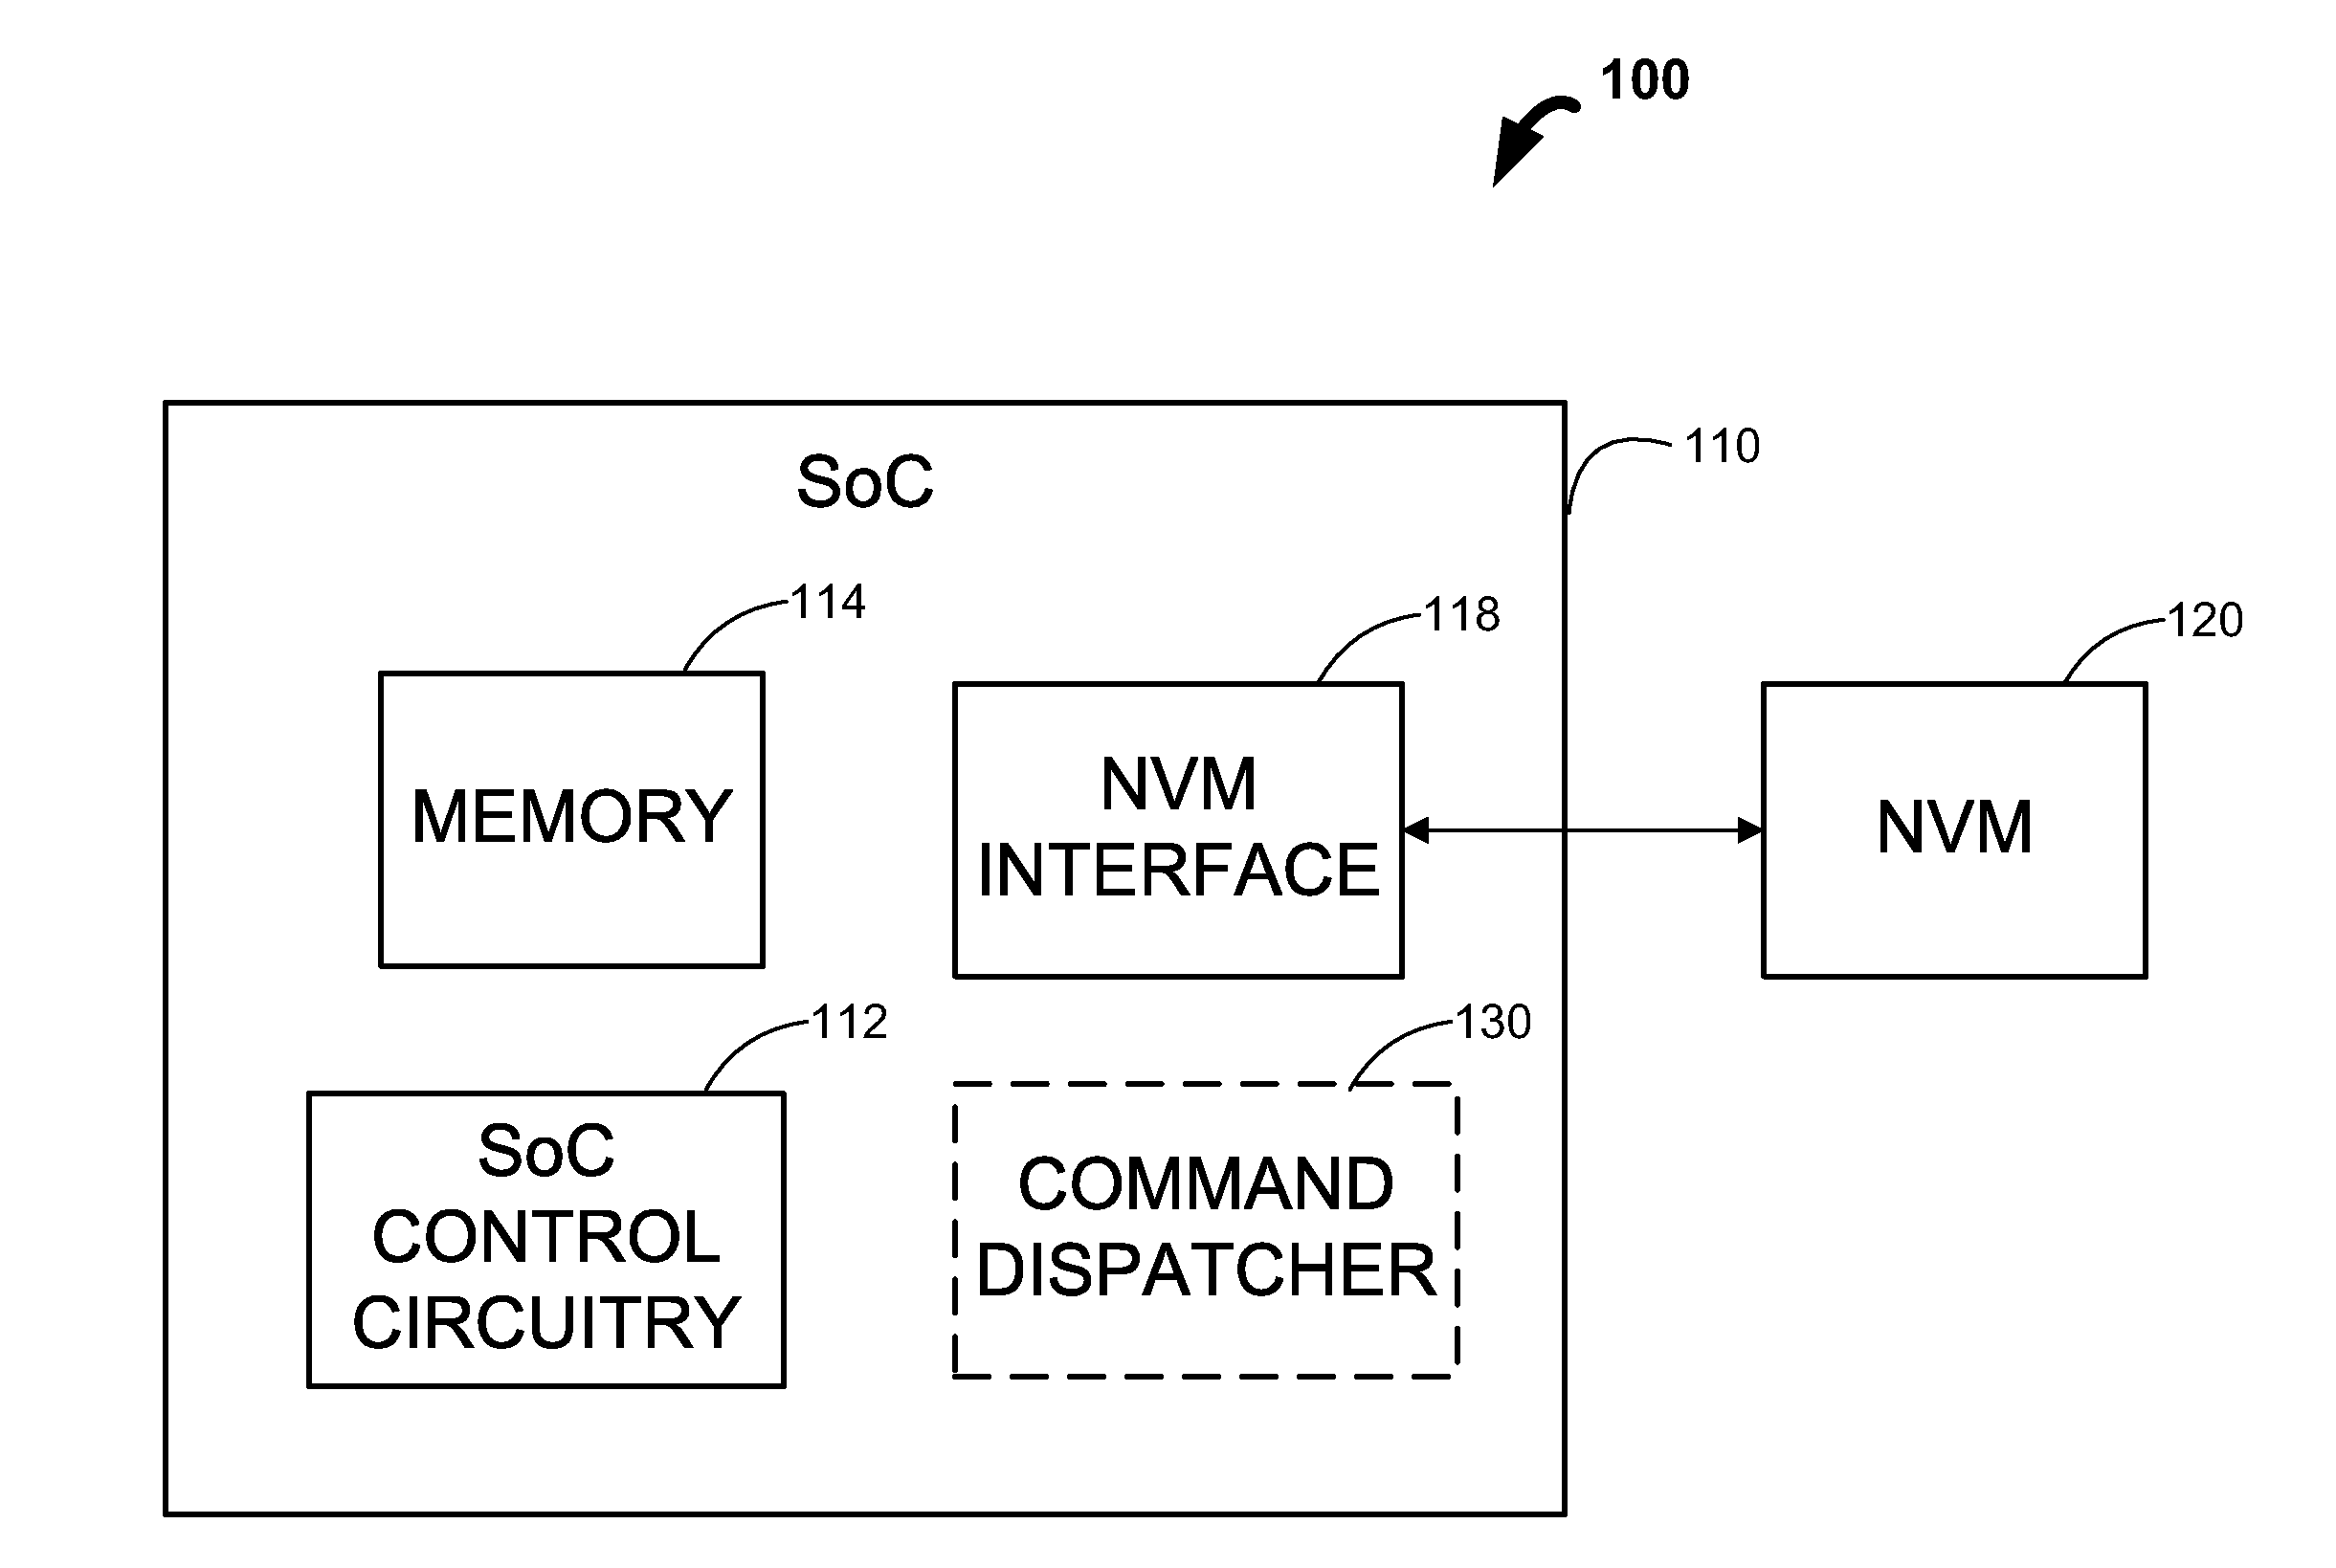 Selectively combining commands for a system having non-volatile memory